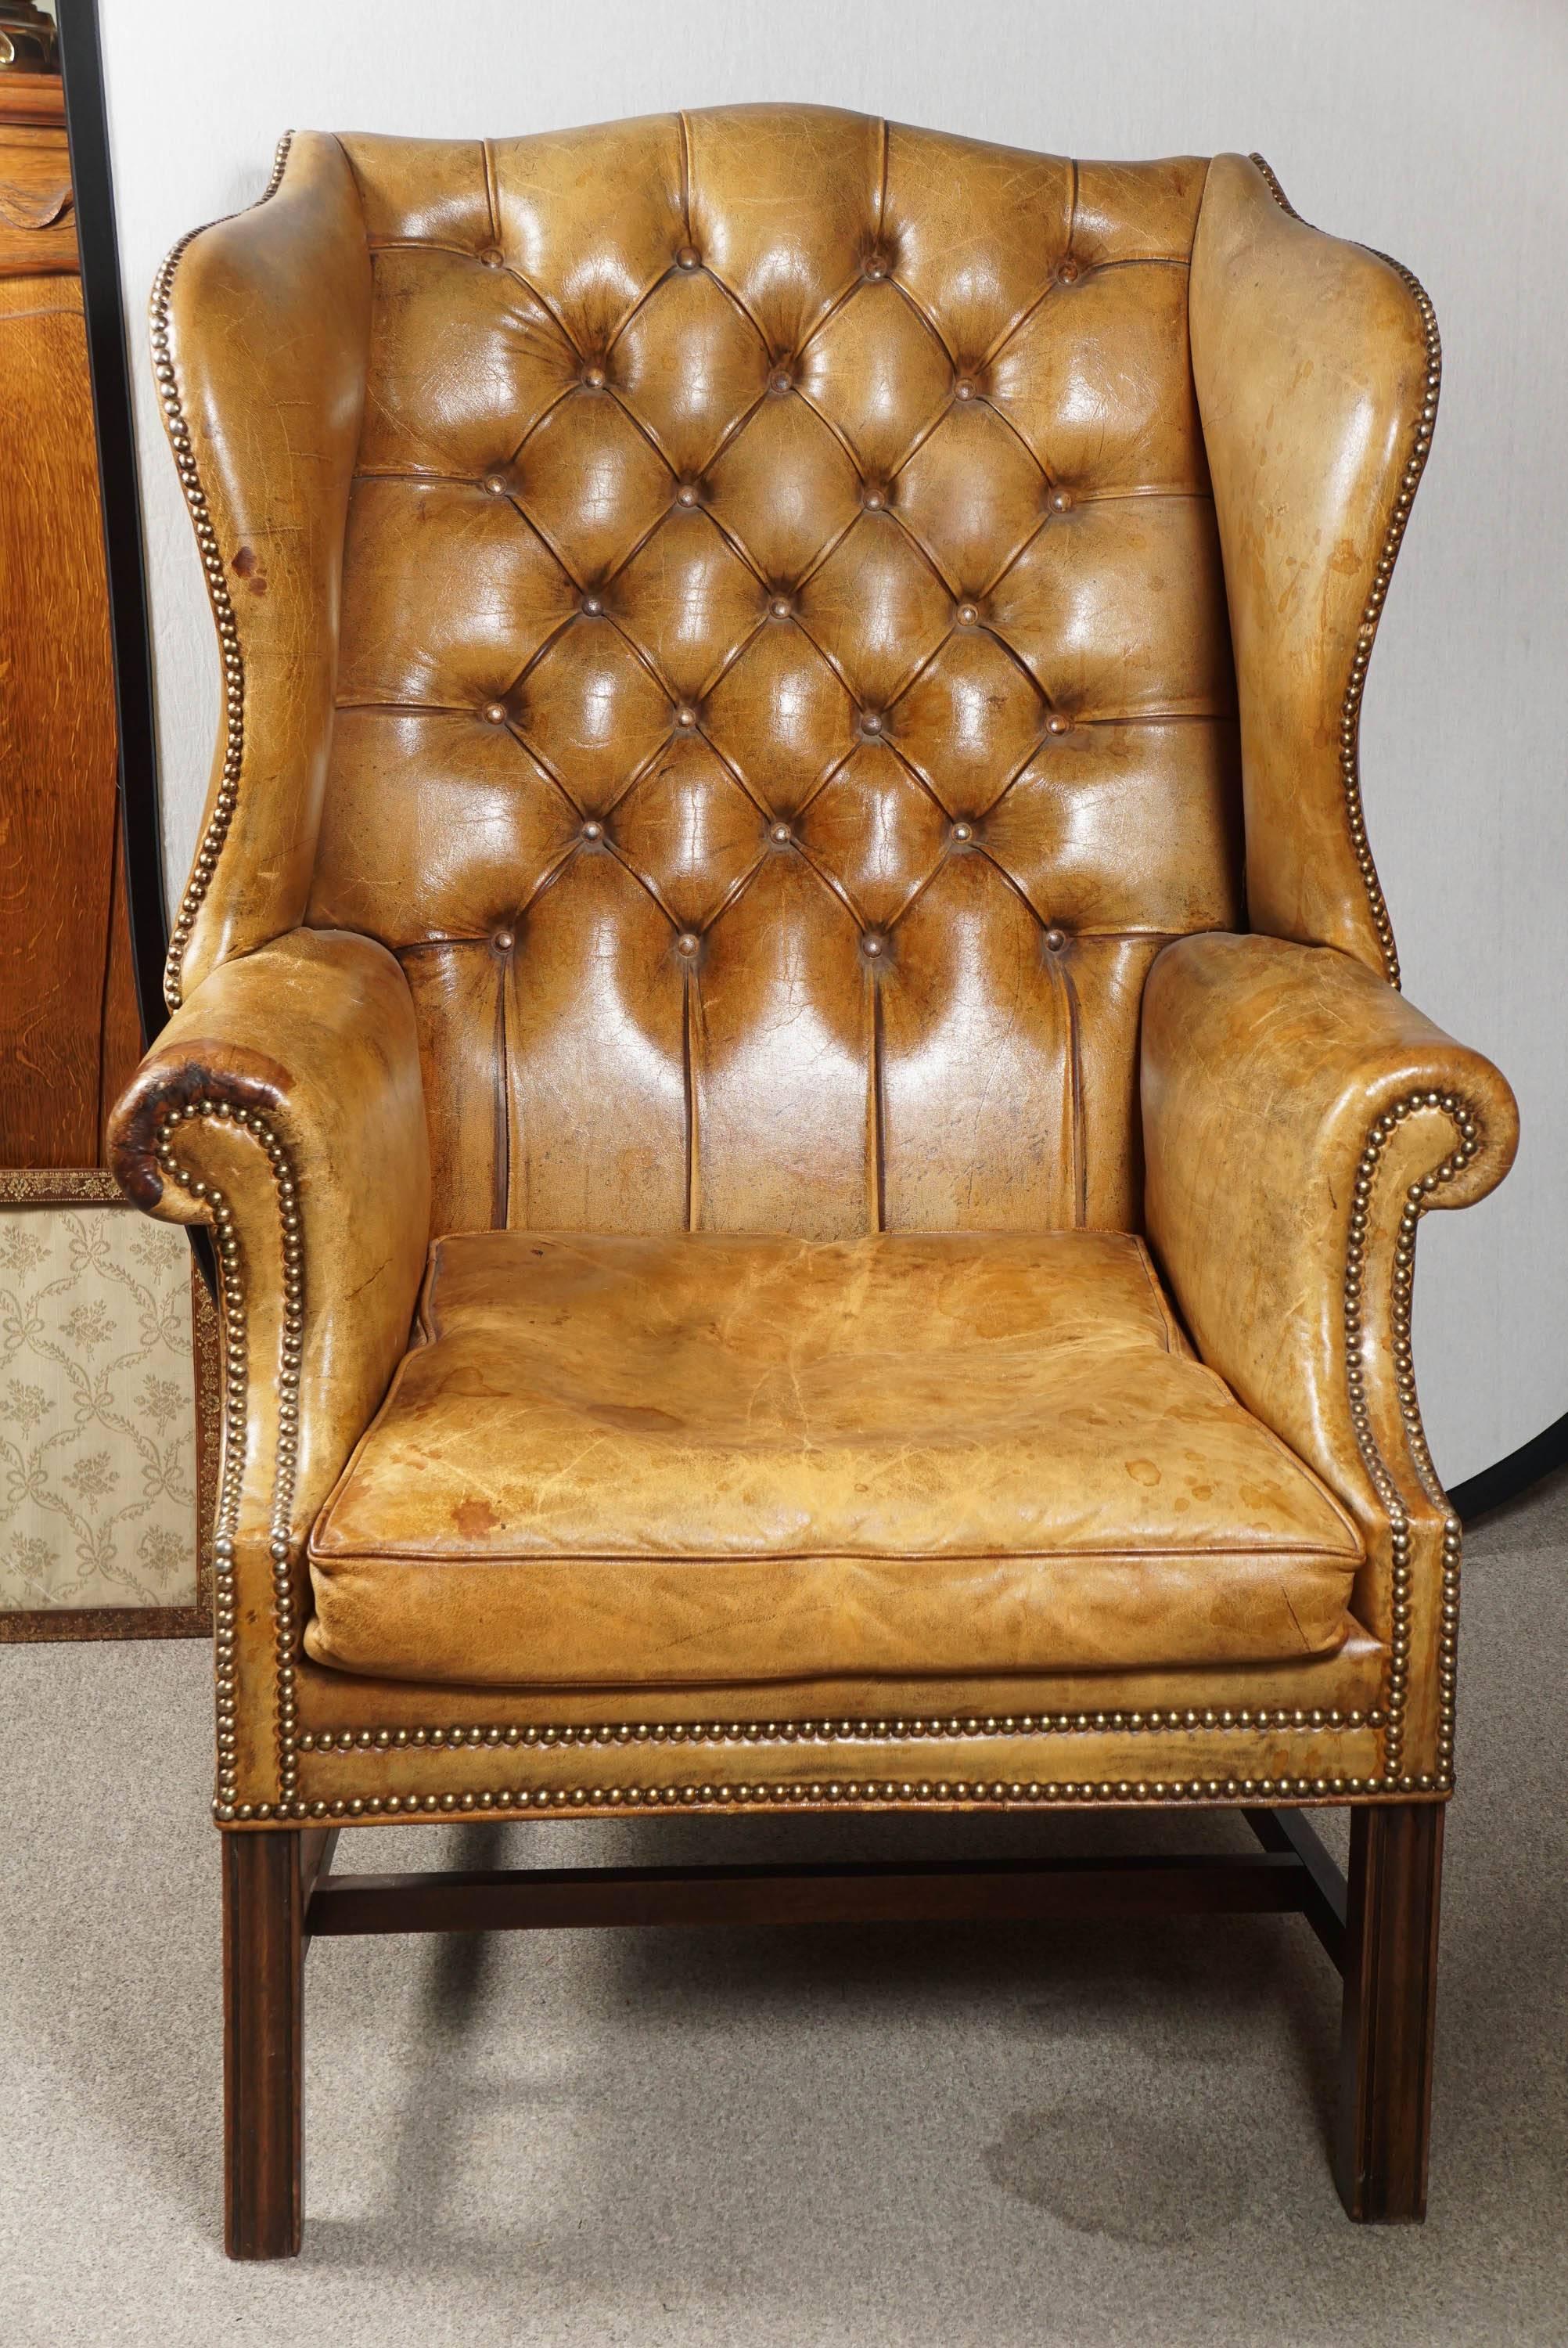 Tufted leather wing back chair. George III style